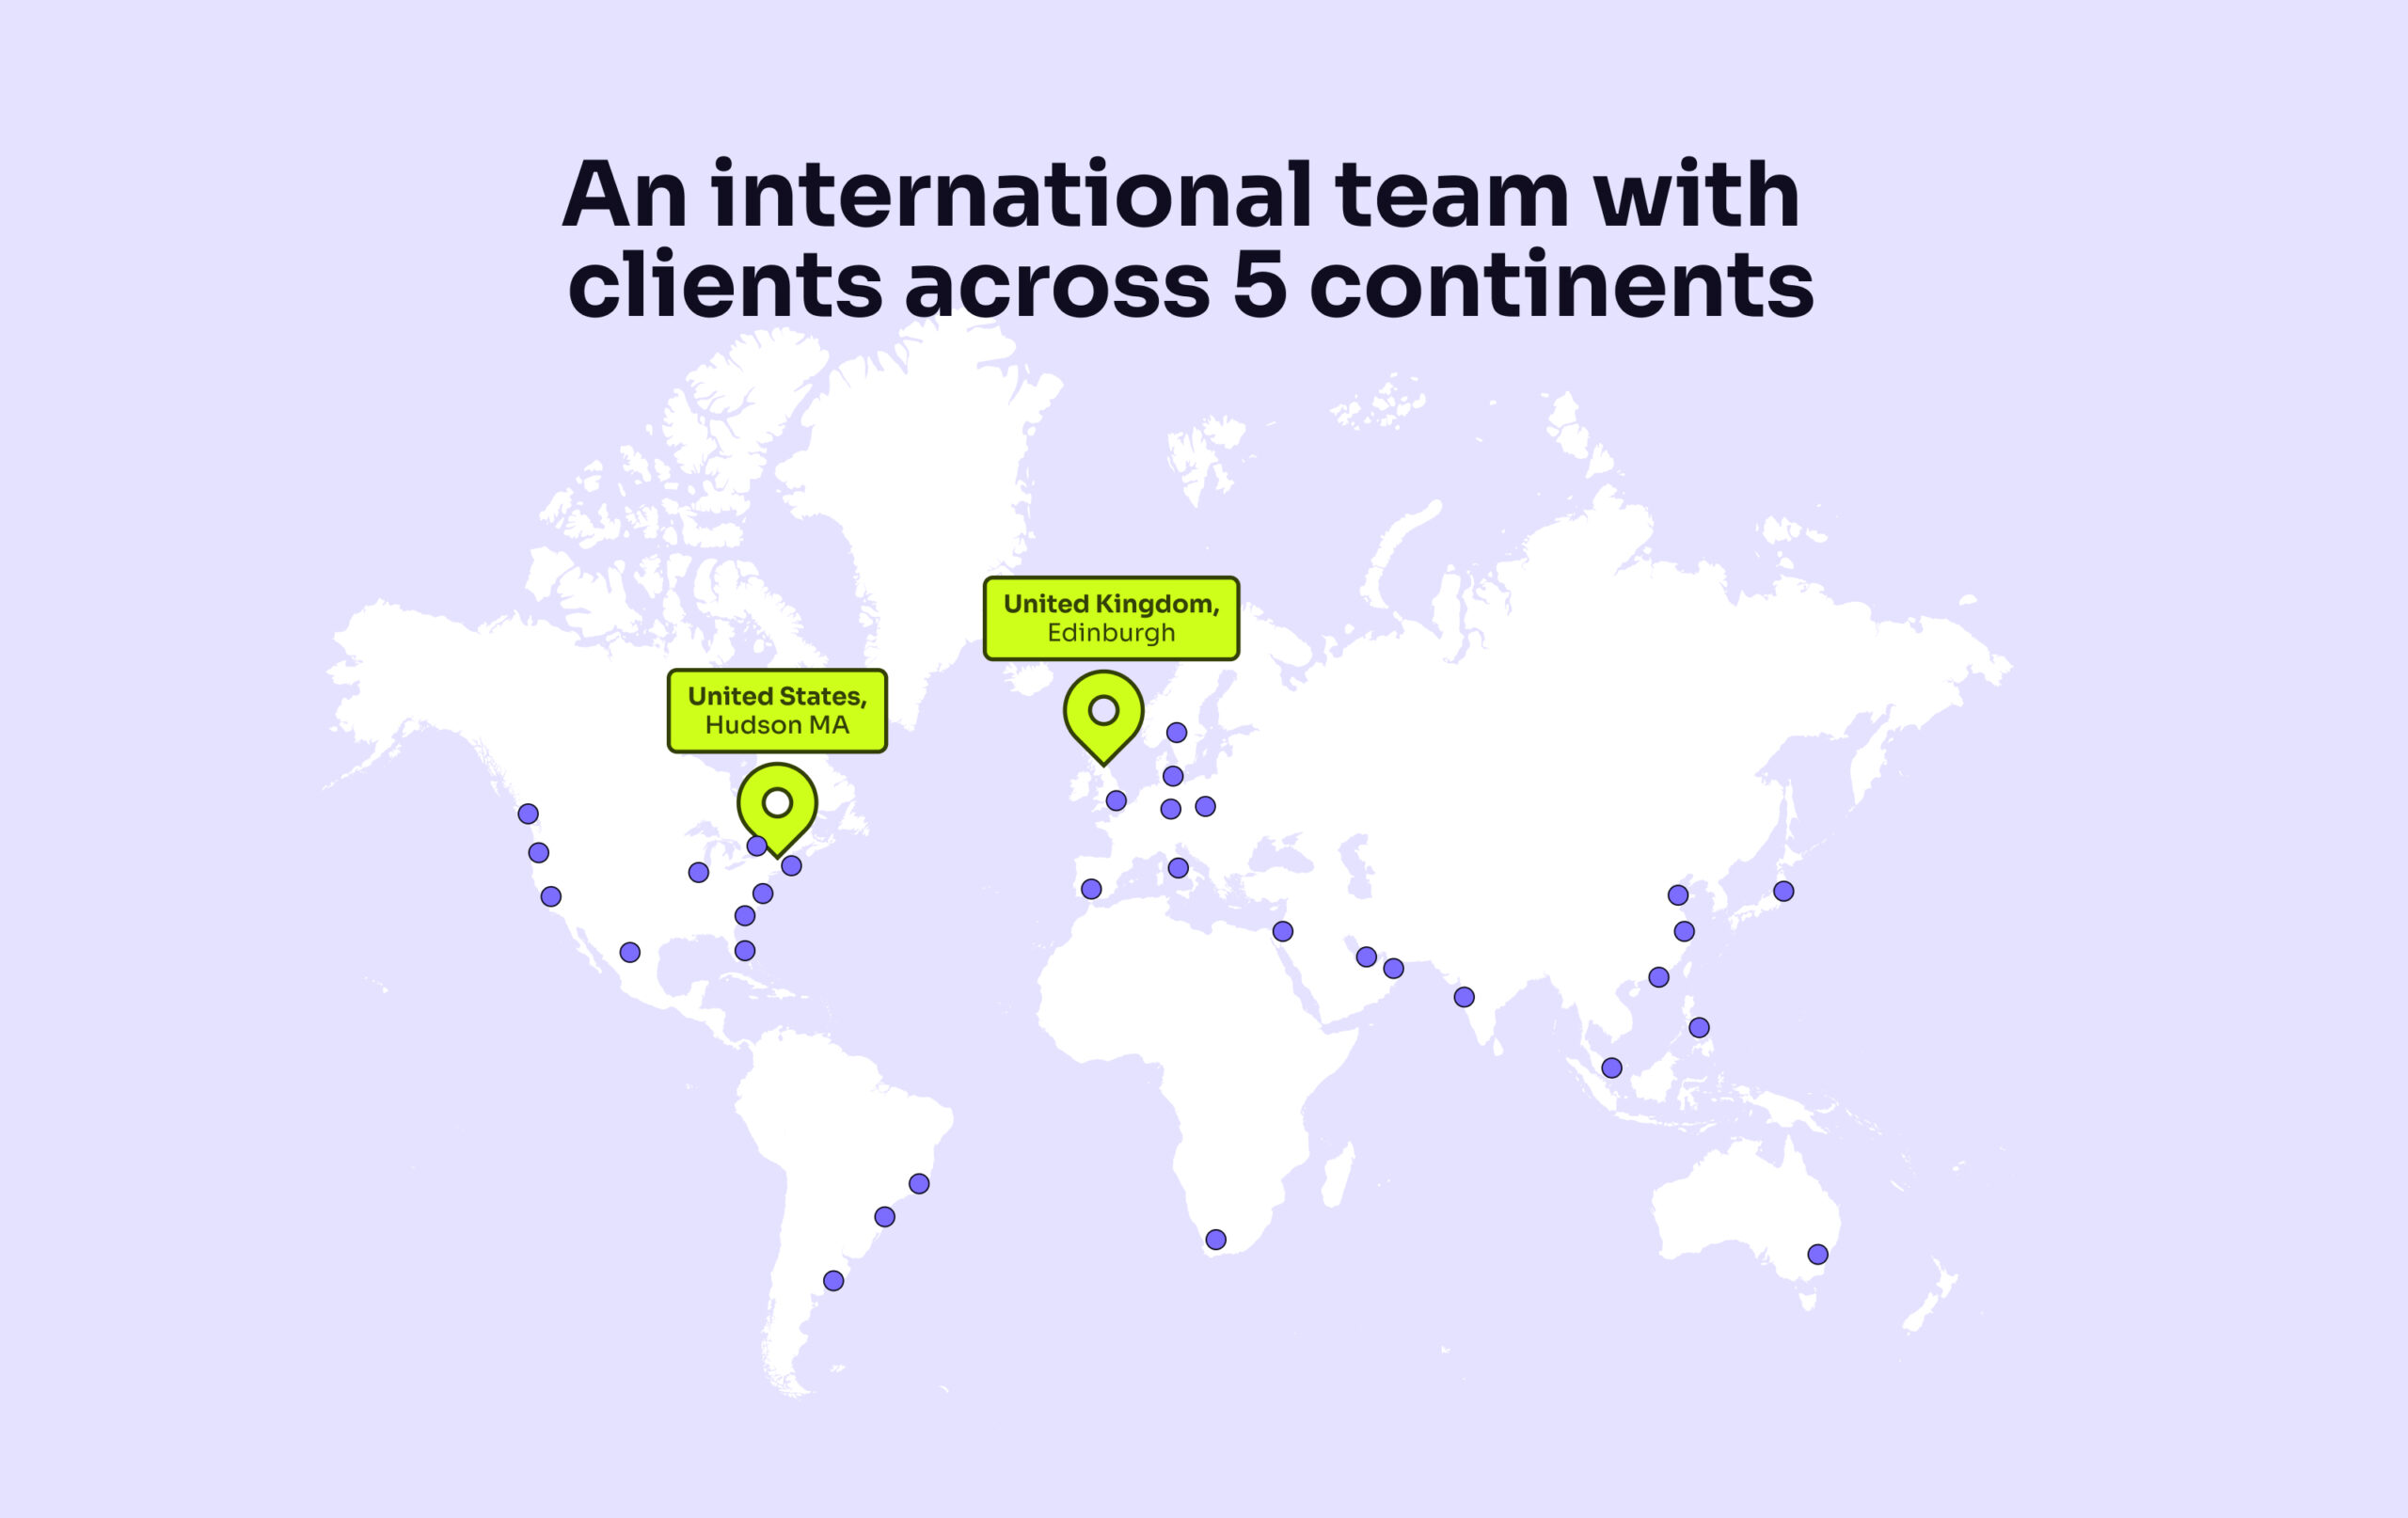 SnapDragon provides online brand protection for clients across five continents